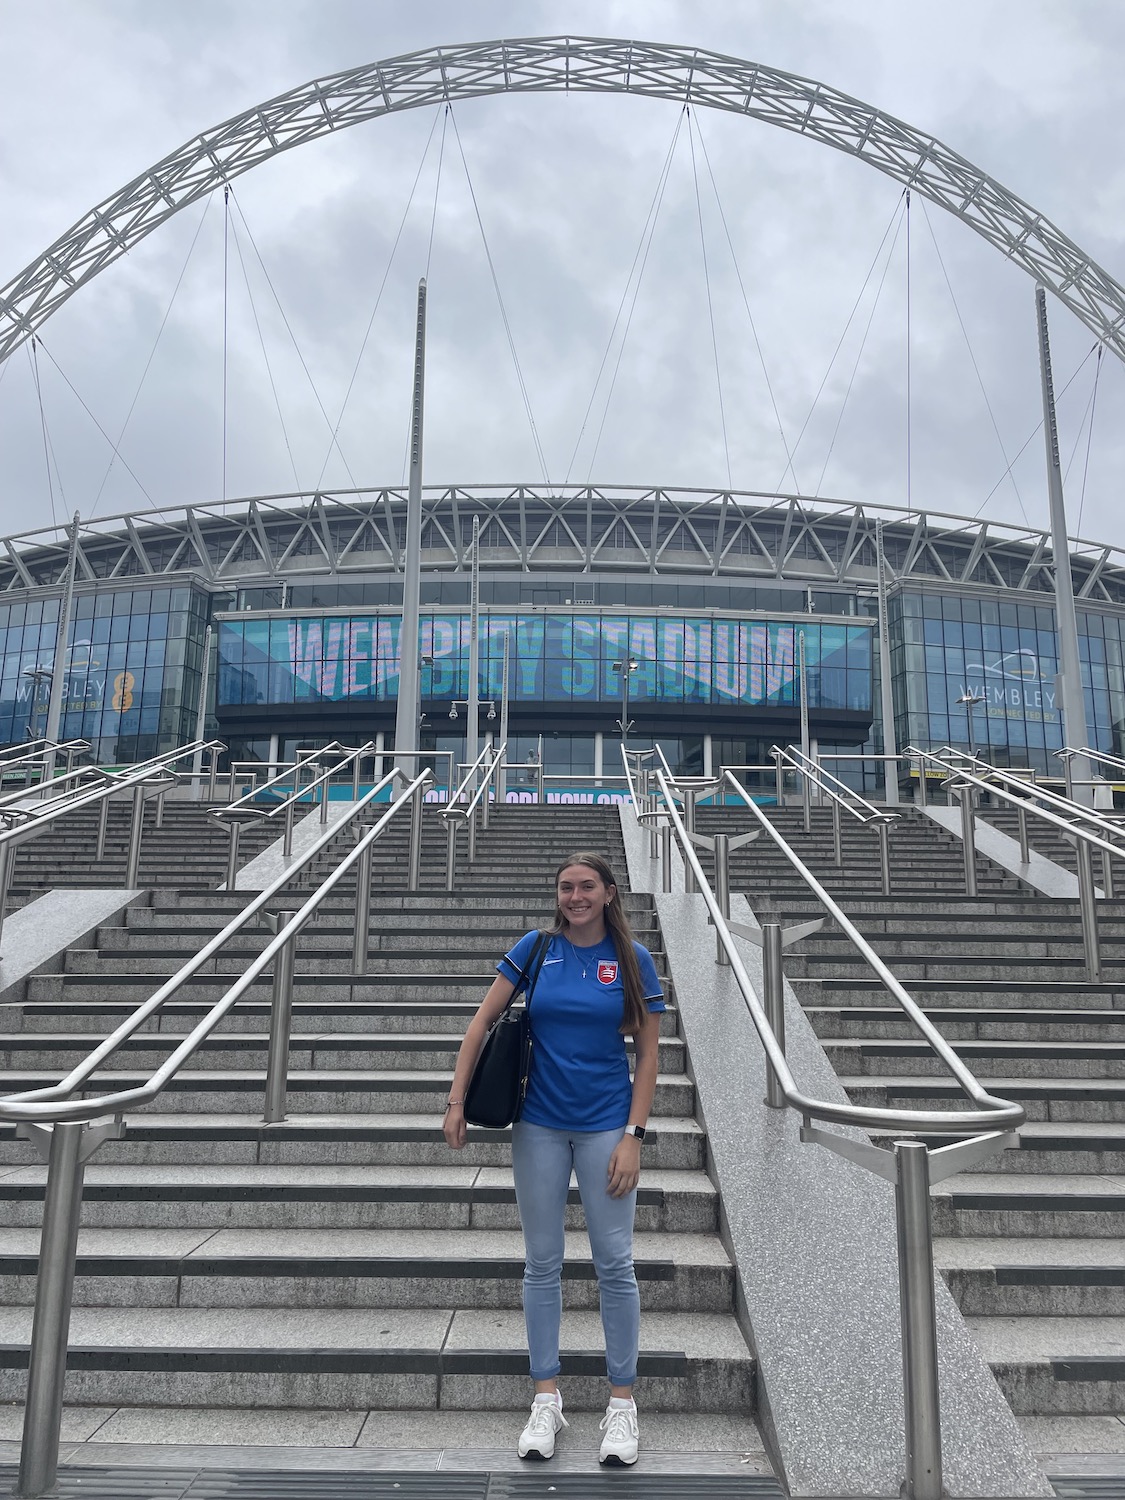 Marietta College student Kaylie Ward ’24 poses for a photo in front of Wembley Stadium during her Education Abroad trip